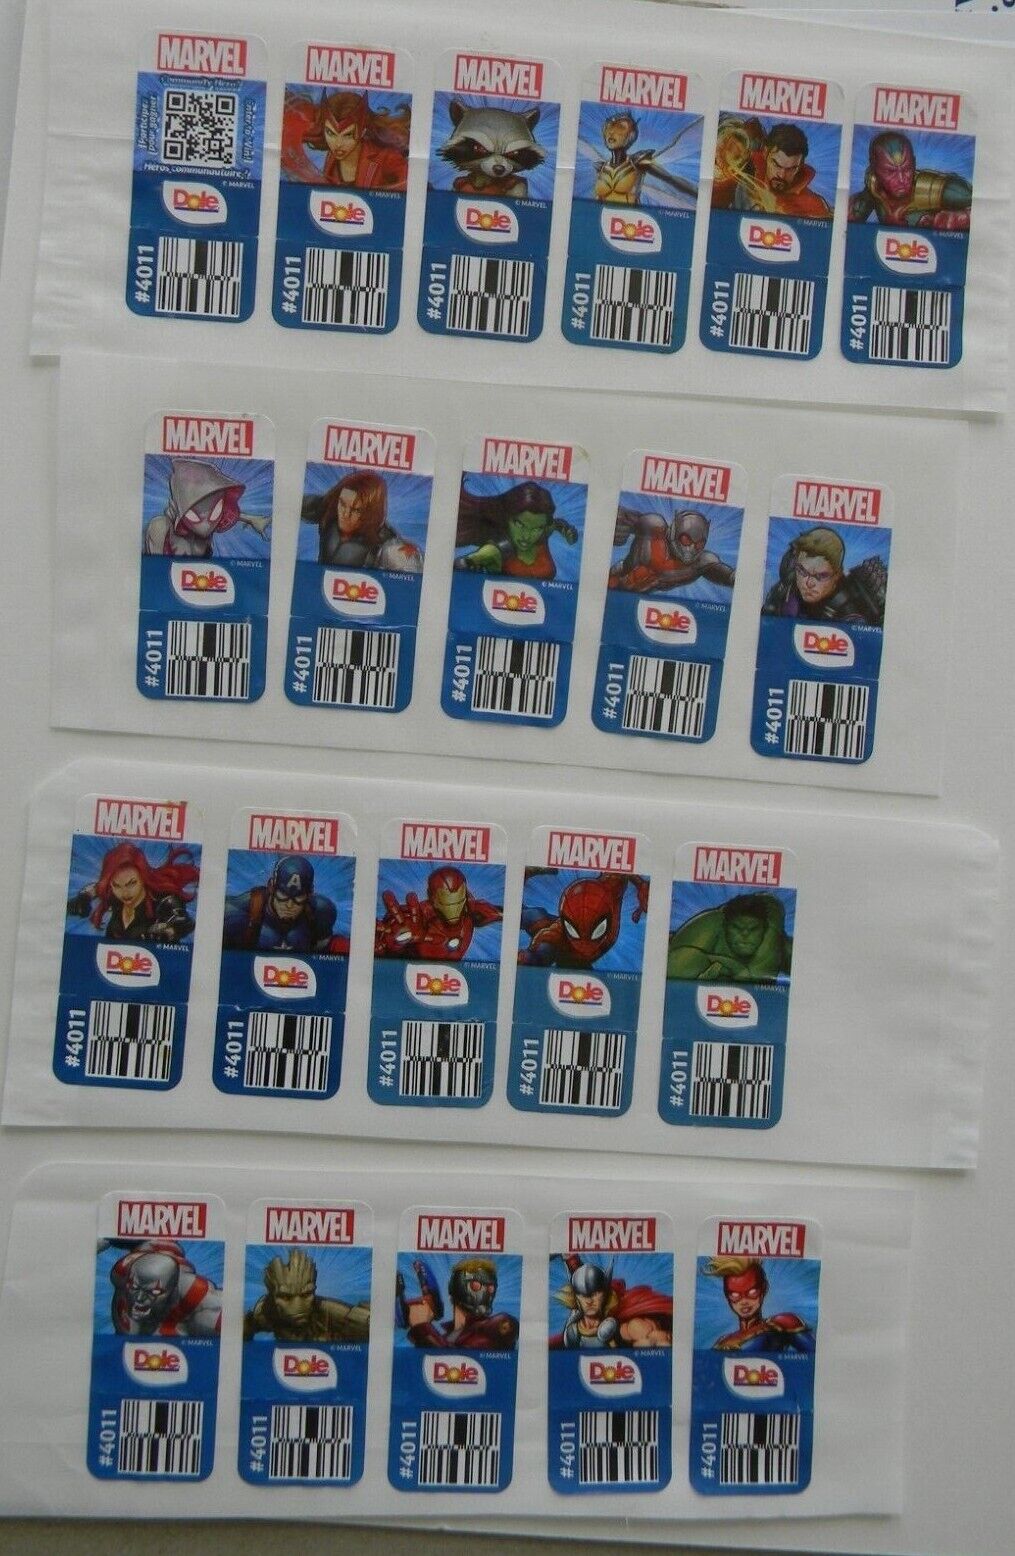 21 Different Marvel Super Heros Dole Banana Stickers  - Aug051